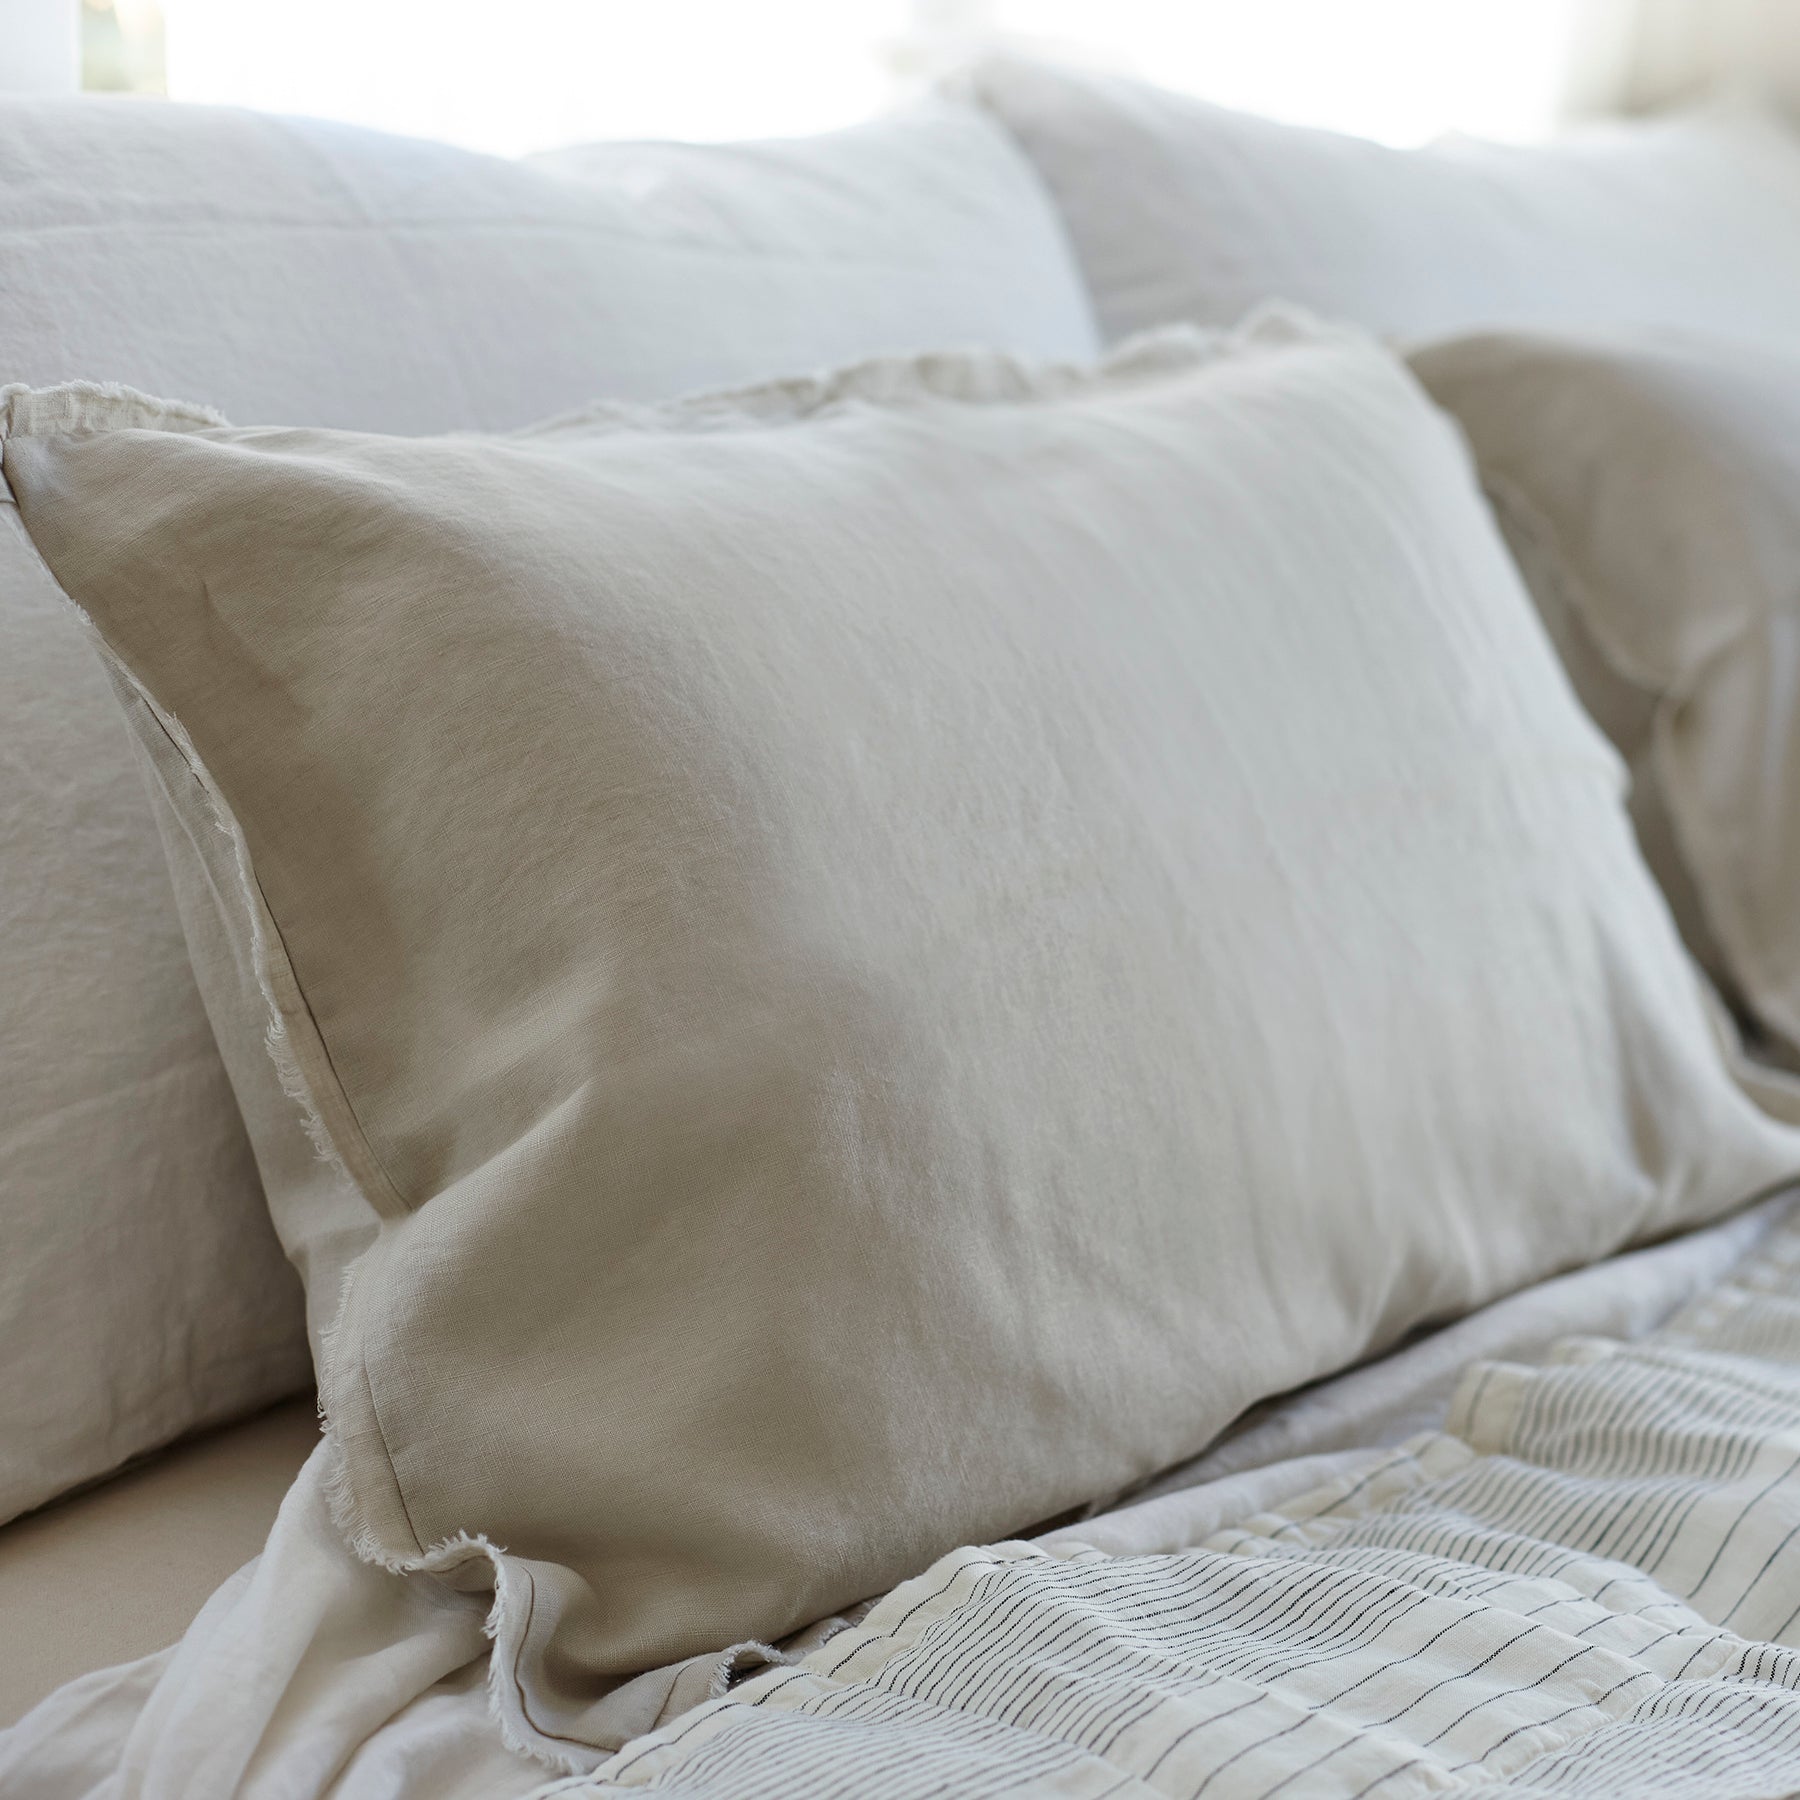 Pair of Linen Pillowcases in Natural